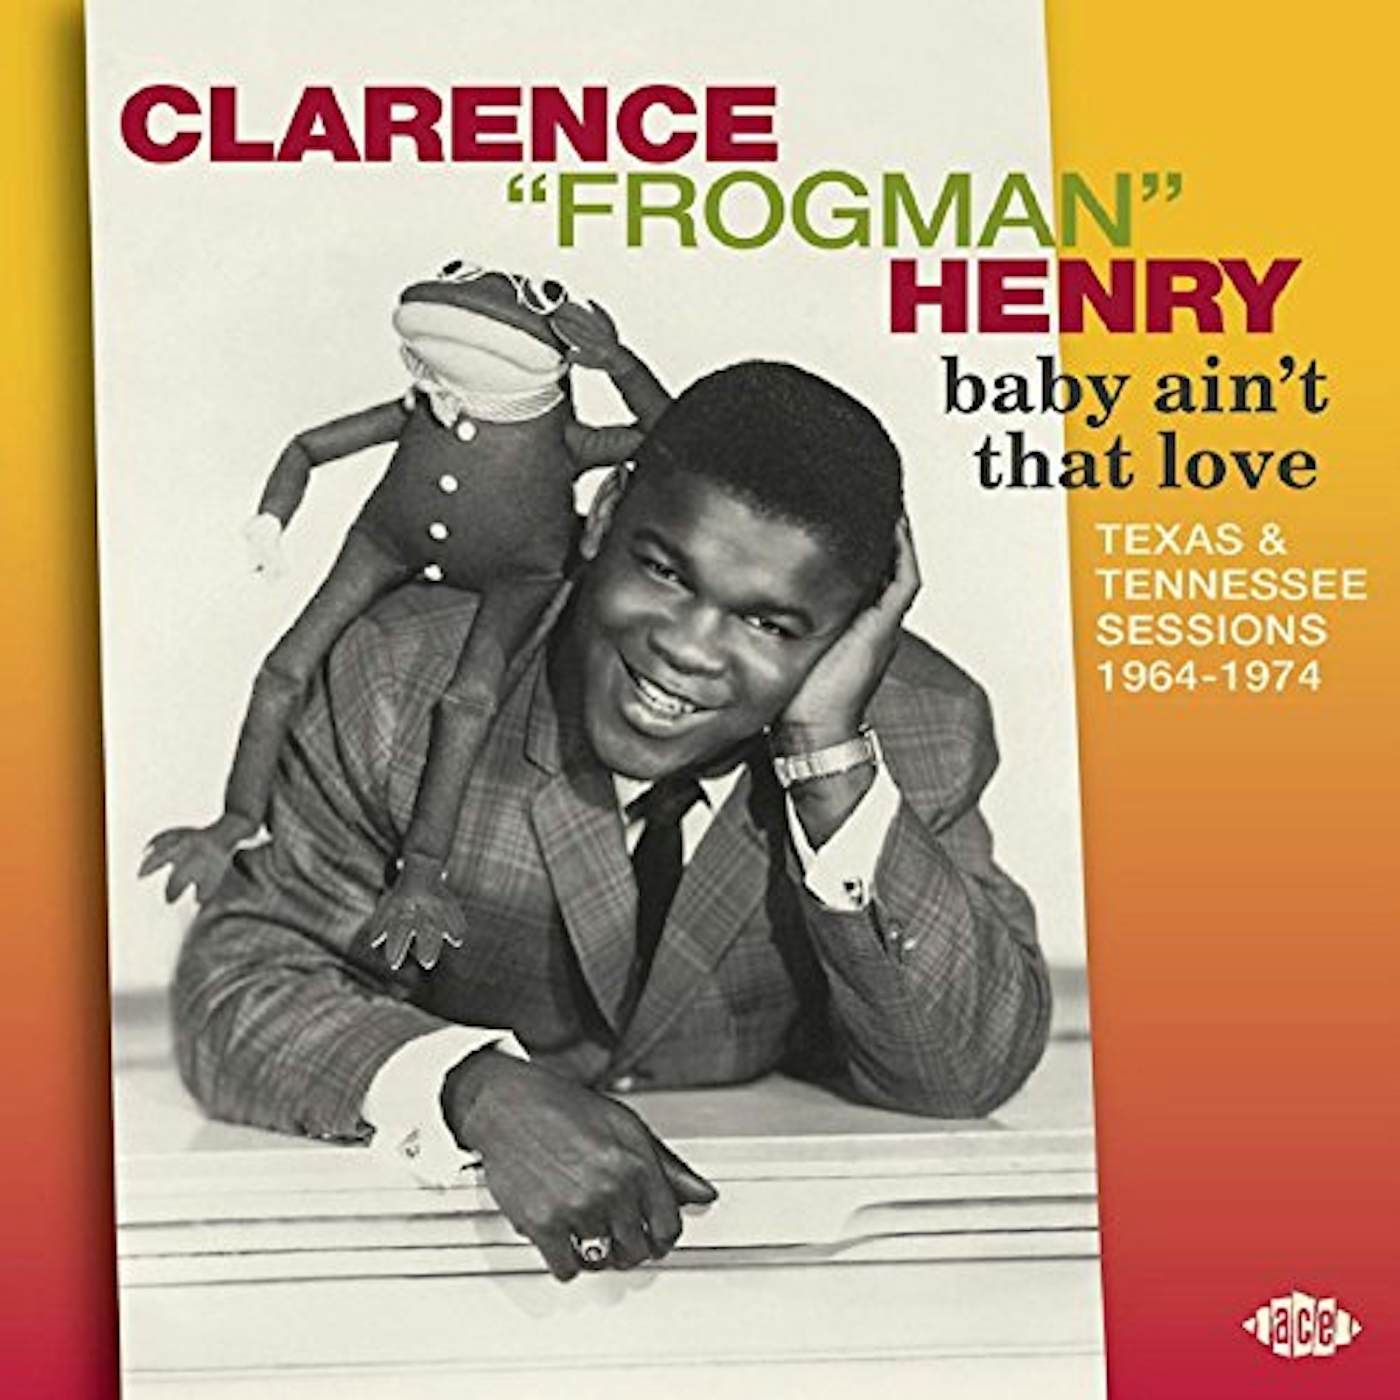 Clarence 'Frogman' Henry – But I Do: The Complete Releases 1956-62